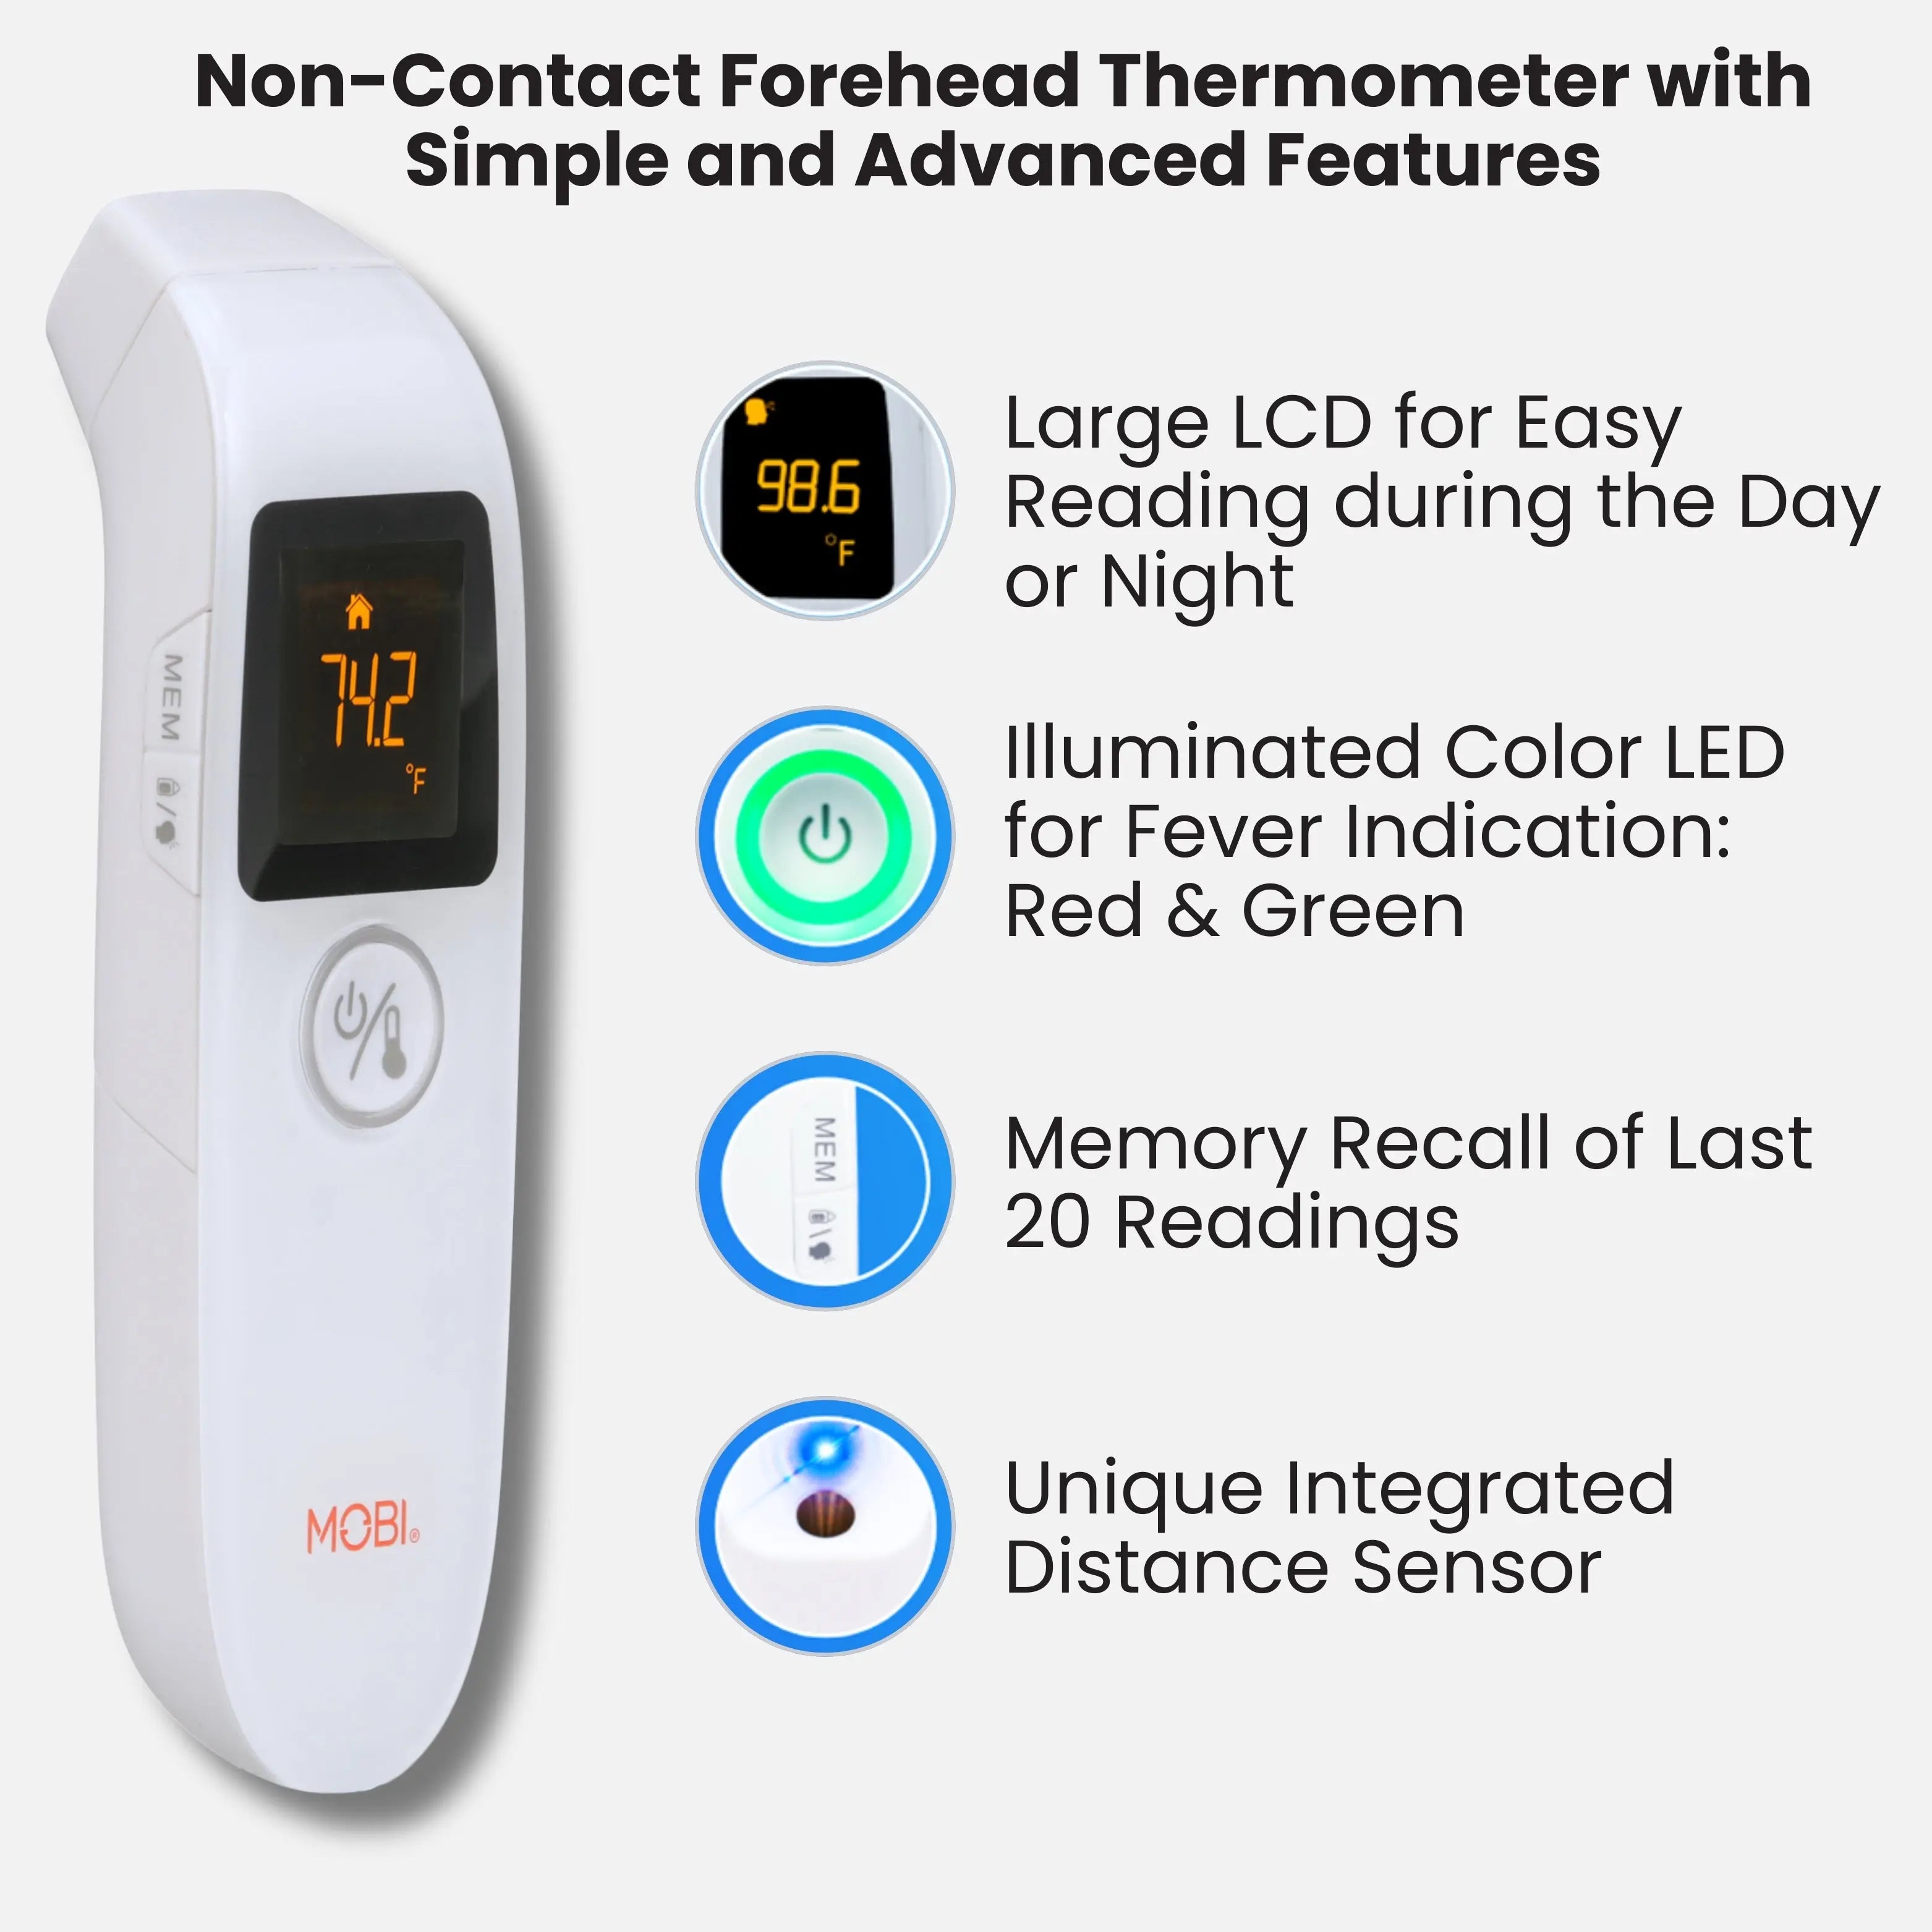 Air Non-Contact Digital Forehead Thermometer MOBI Technologies Inc.